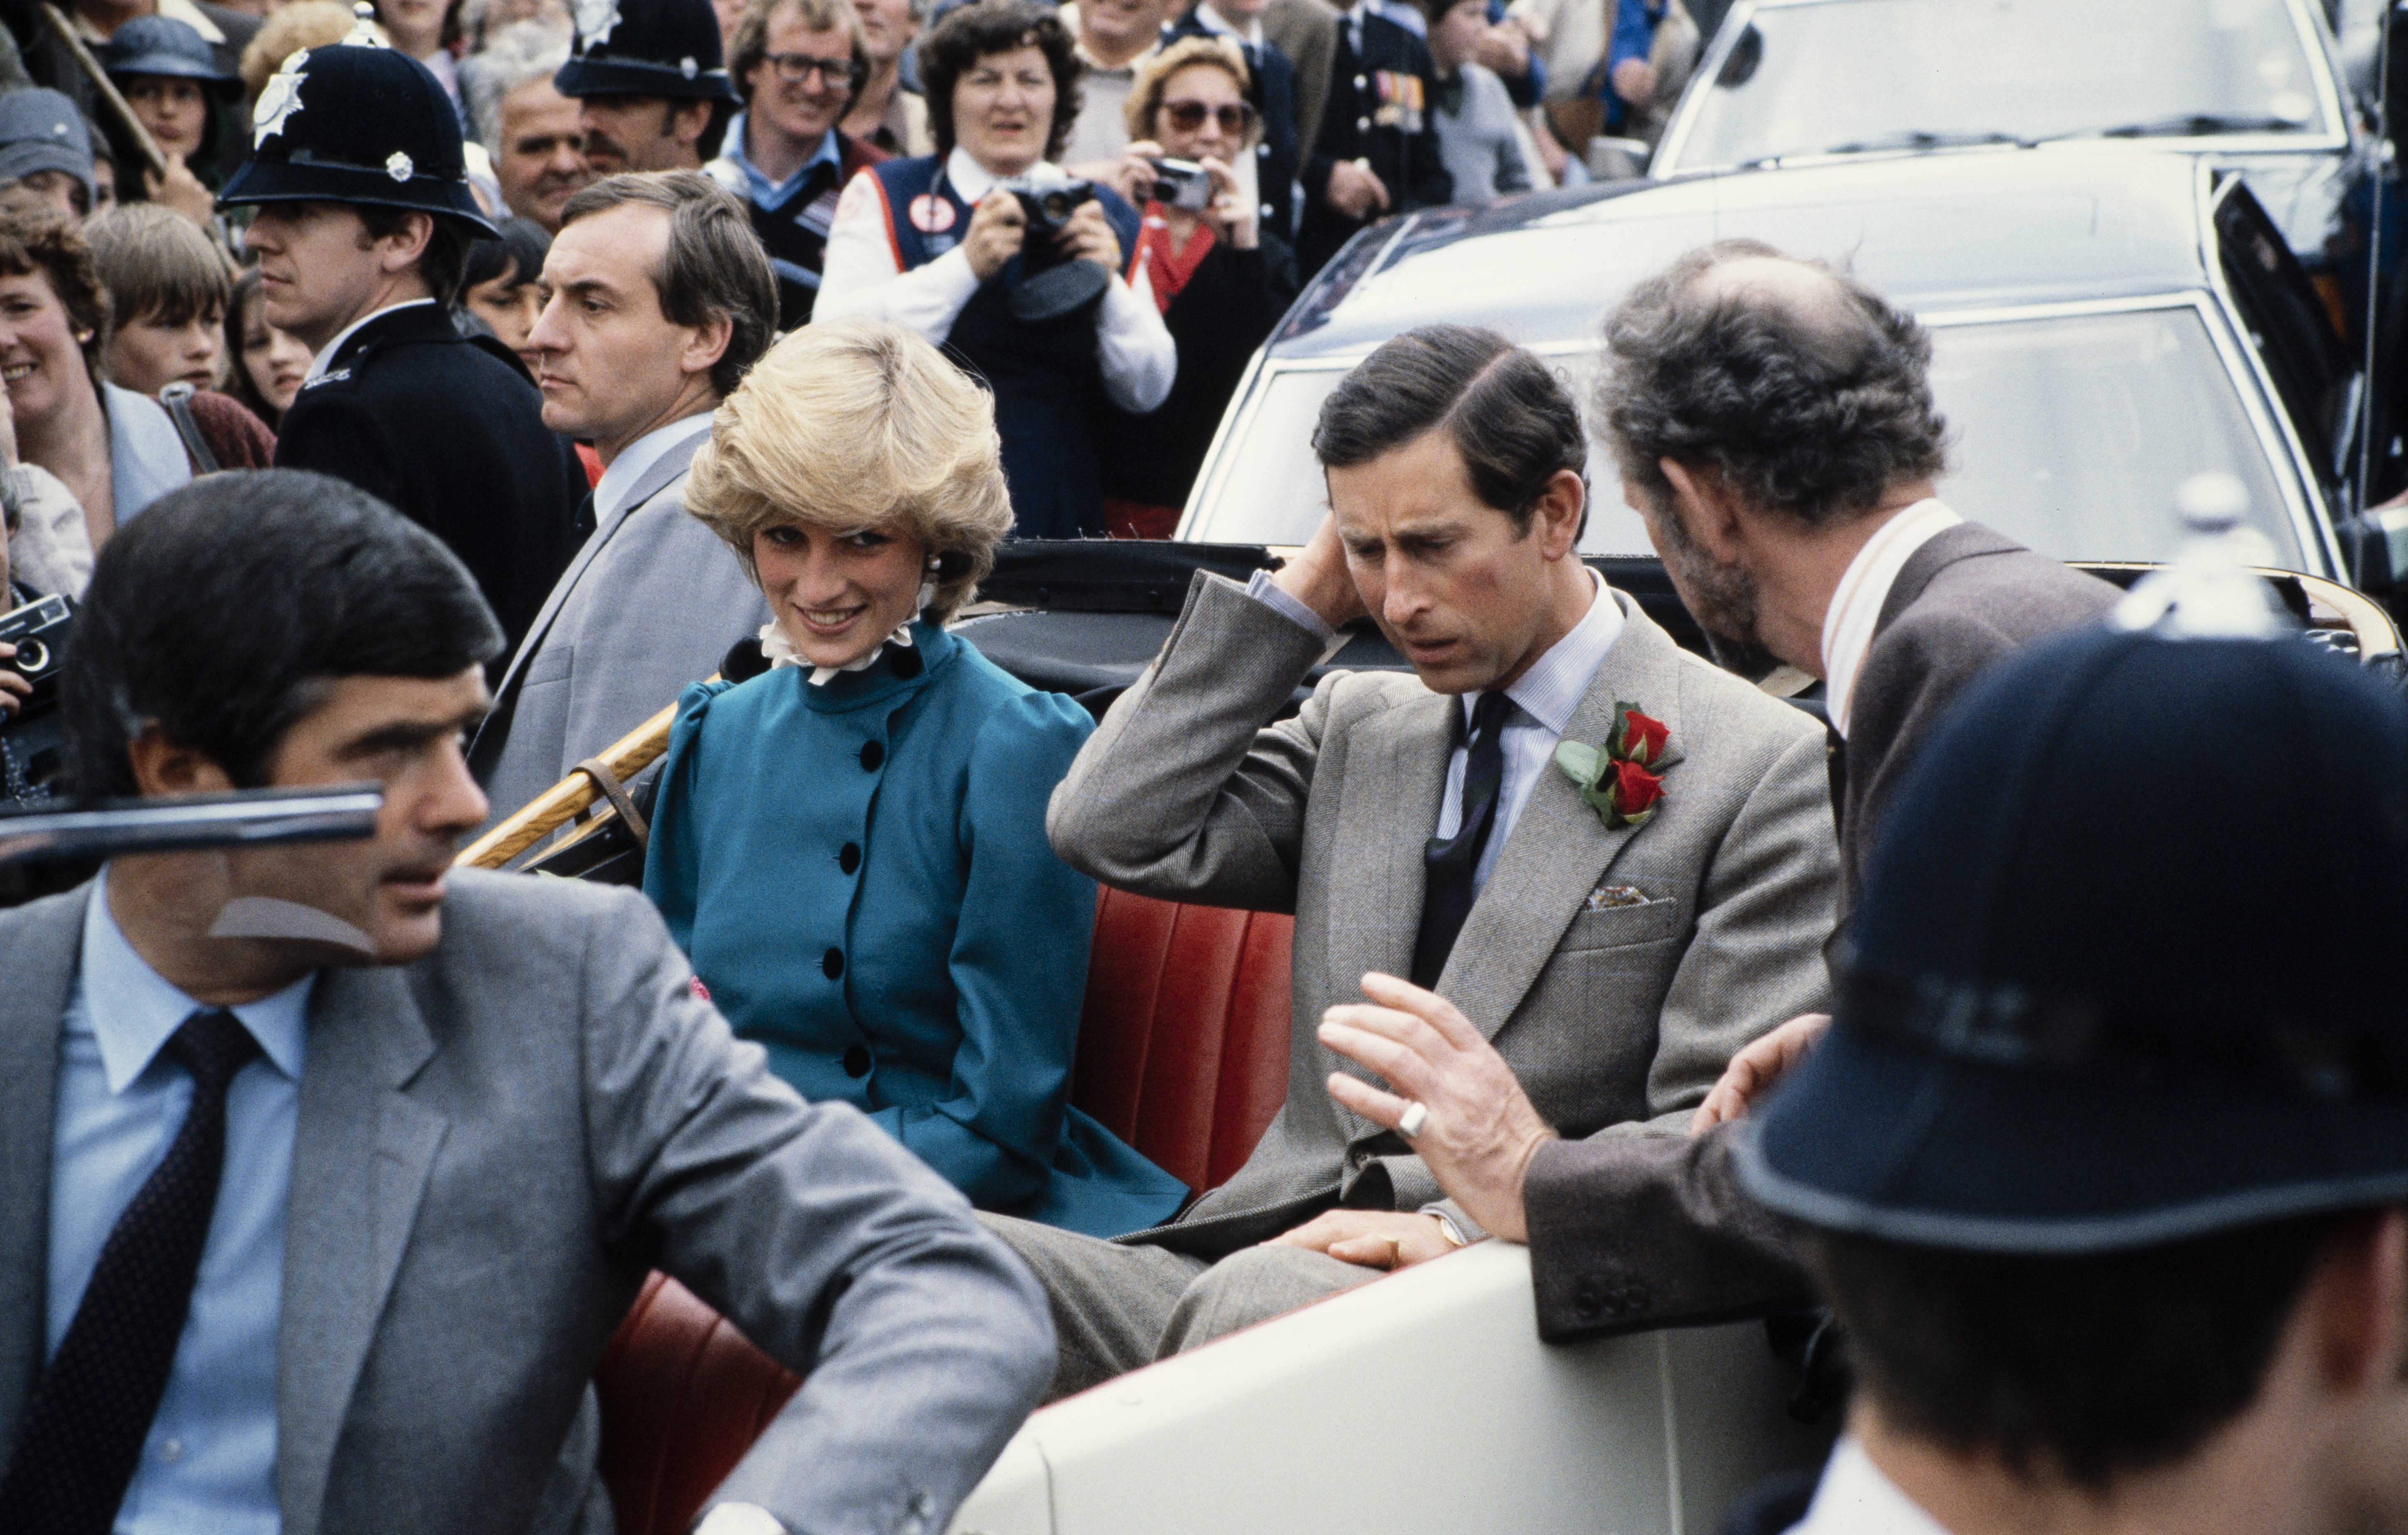 Prince Charles and Princess Diana in St Columb, Cornwall, in May 1983. | Source: Getty Images